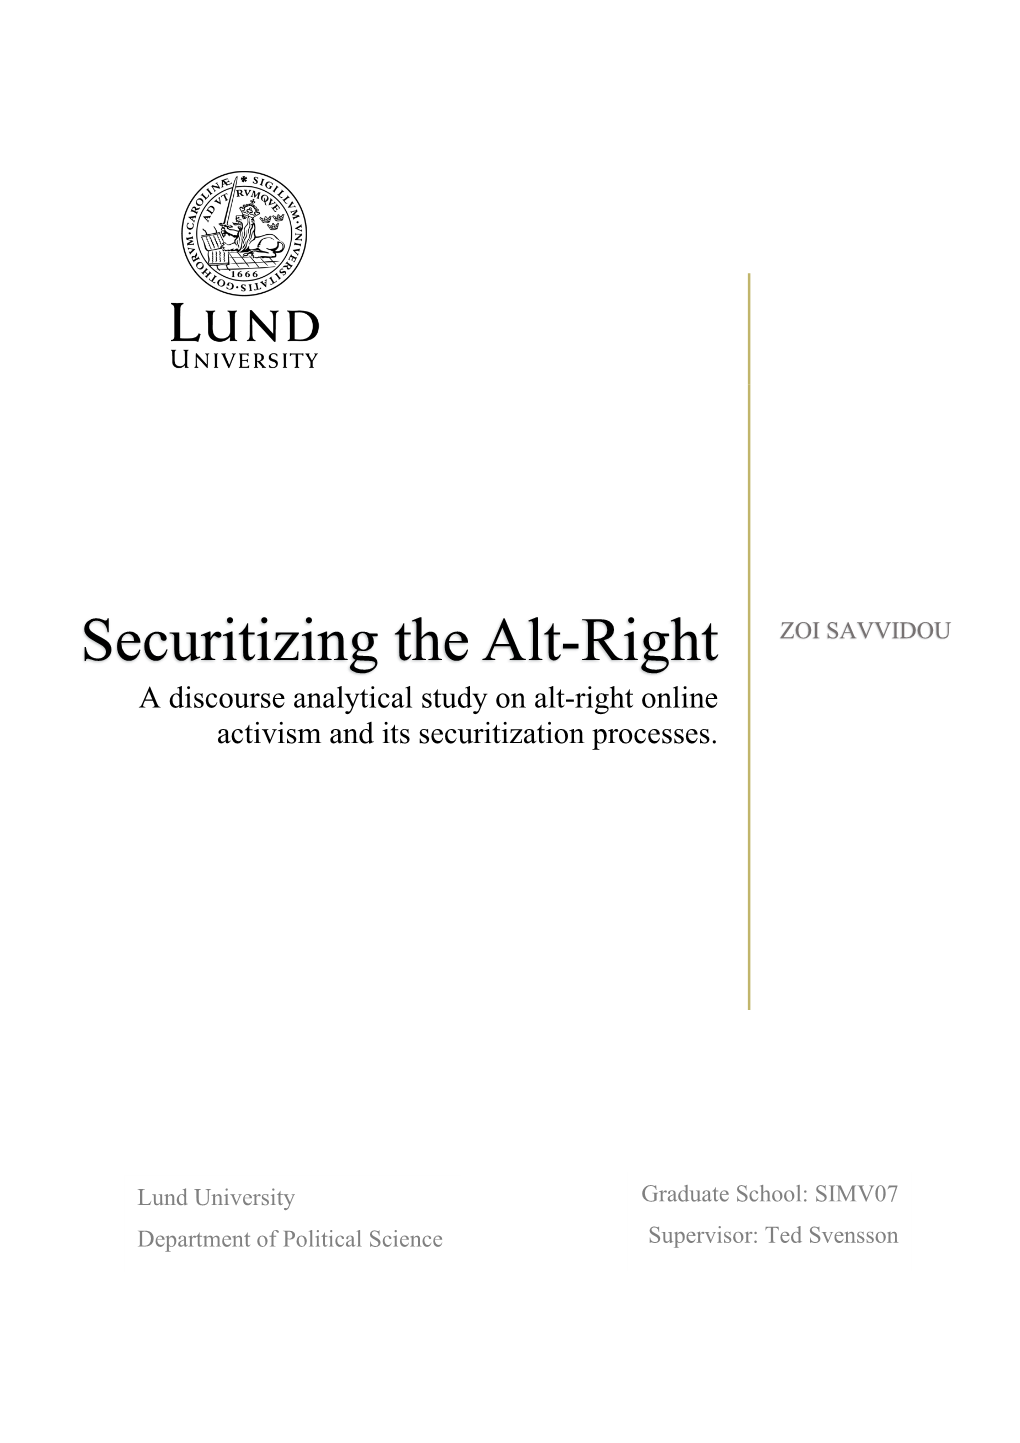 Securitizing the Alt-Right a Discourse Analytical Study on Alt-Right Online Activism and Its Securitization Processes